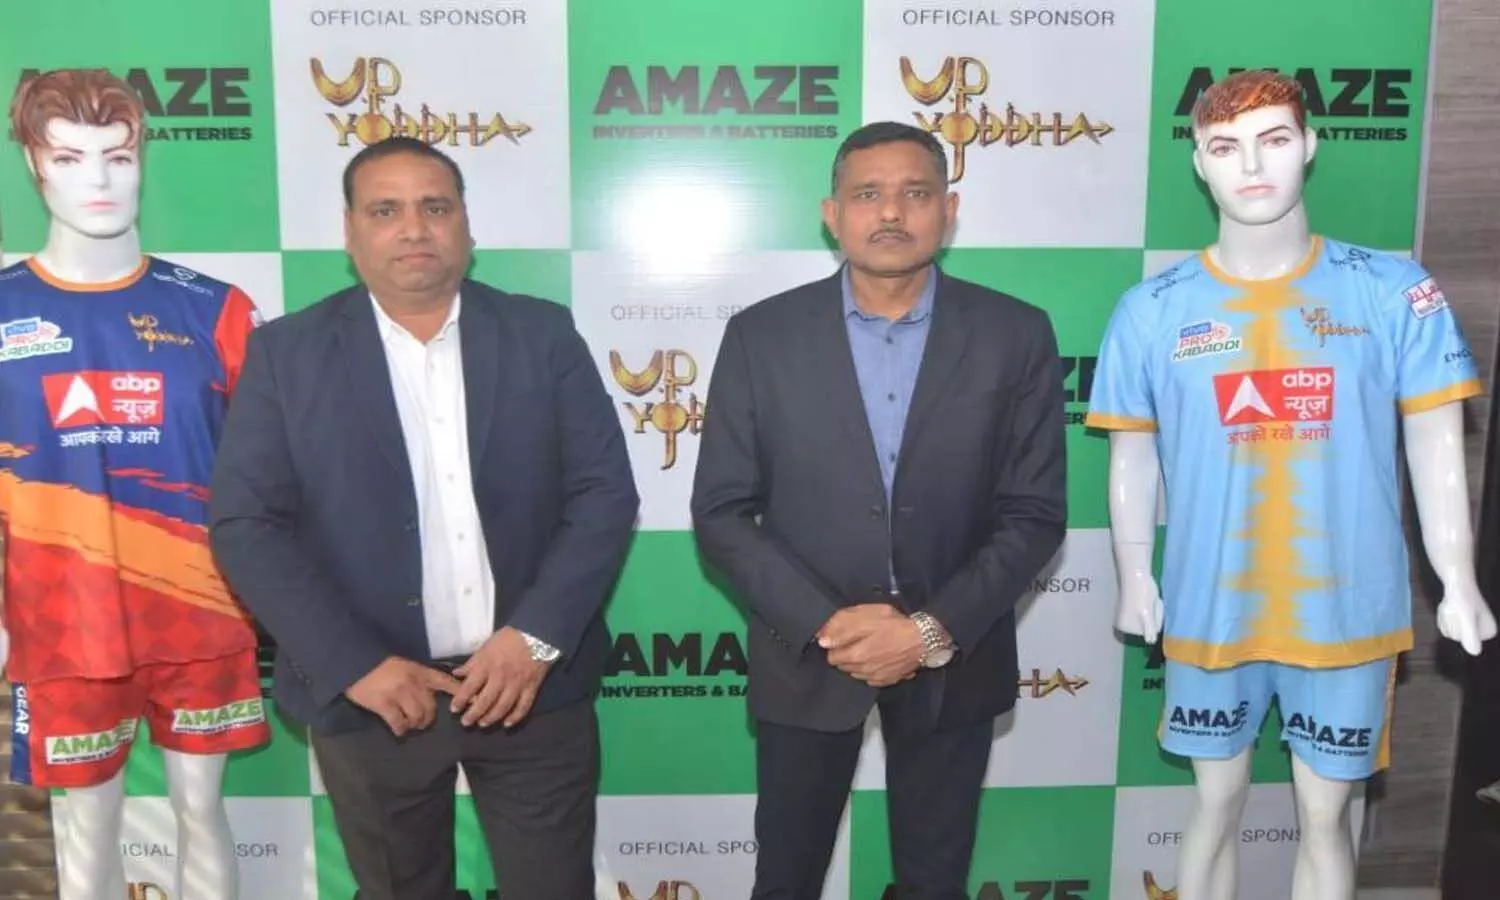 Amaze Becomes an Official Sponsor of UP Yoddhas in the Pro Kabaddi League Season 8